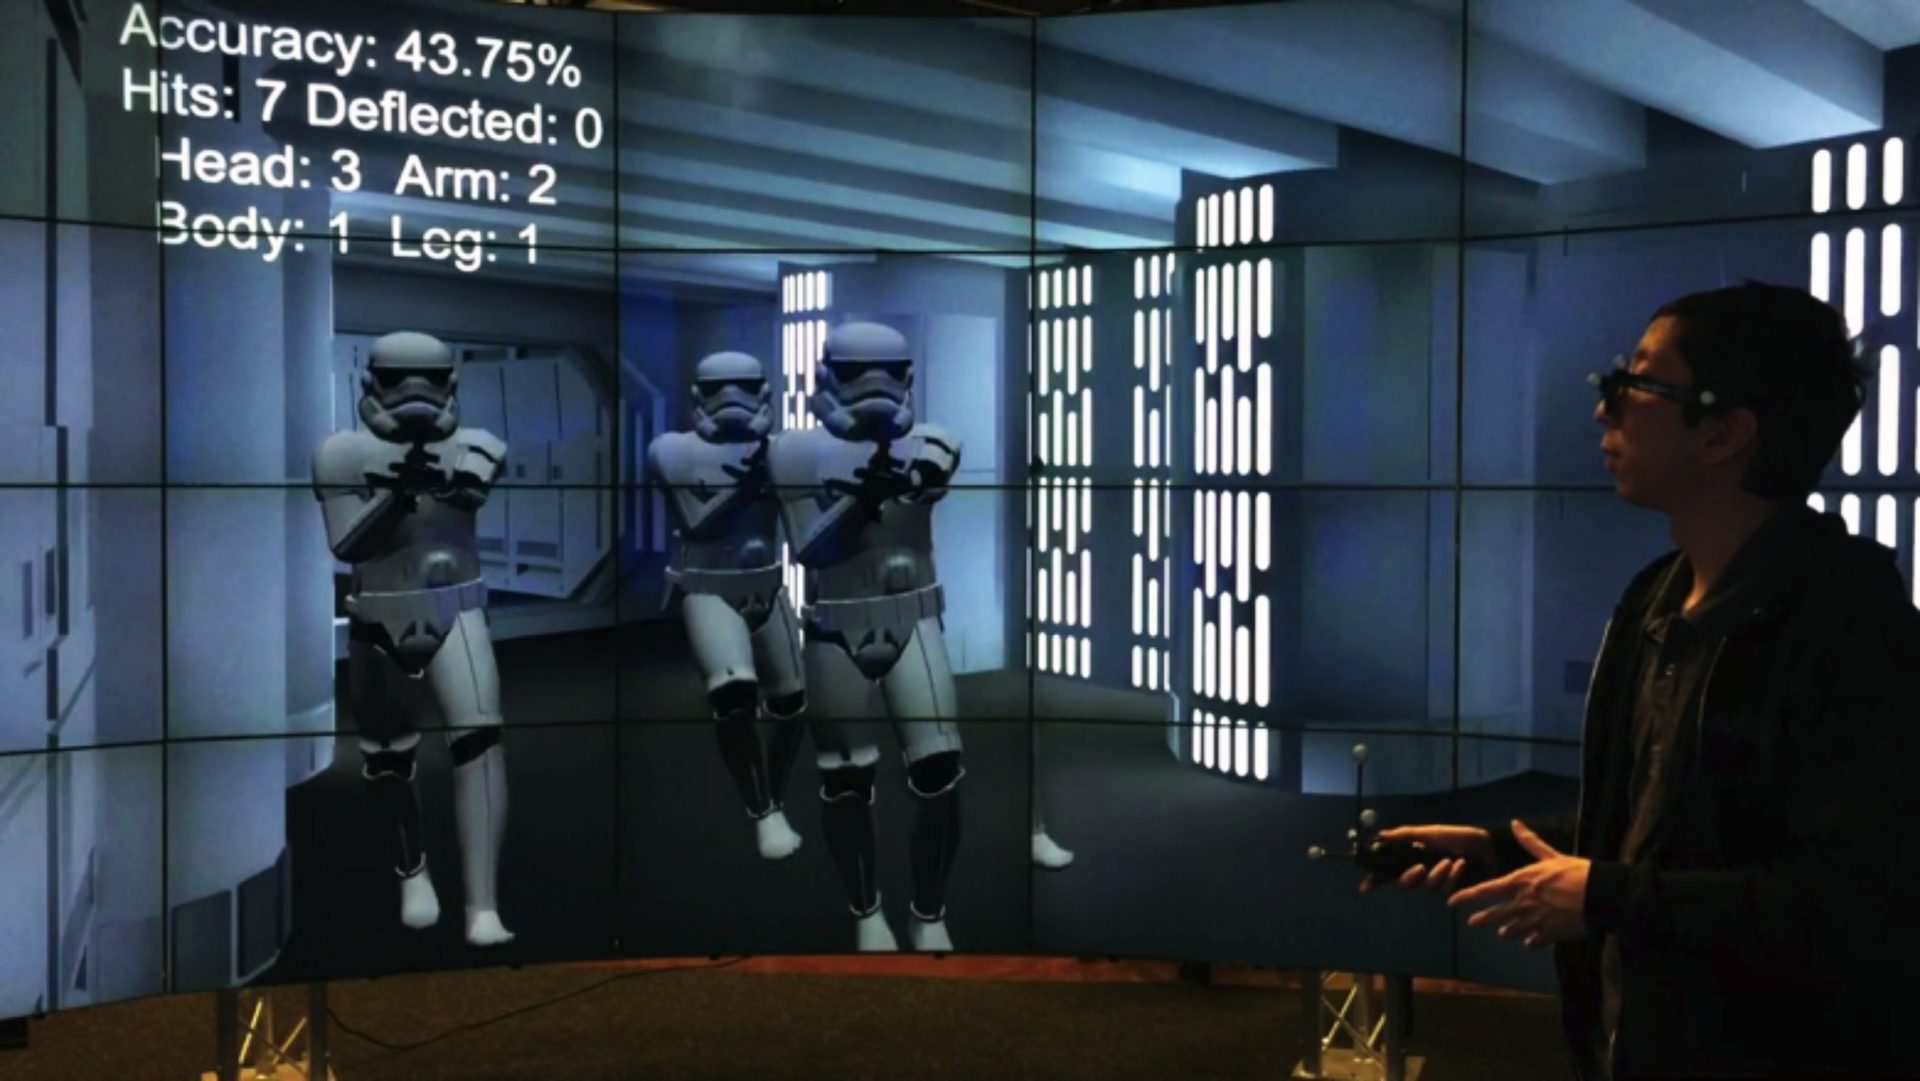 Arthur Nishimoto and the Stormtroopers in the Death Star, shown in the UIC CAVE2 Hybrid Reality Environment.